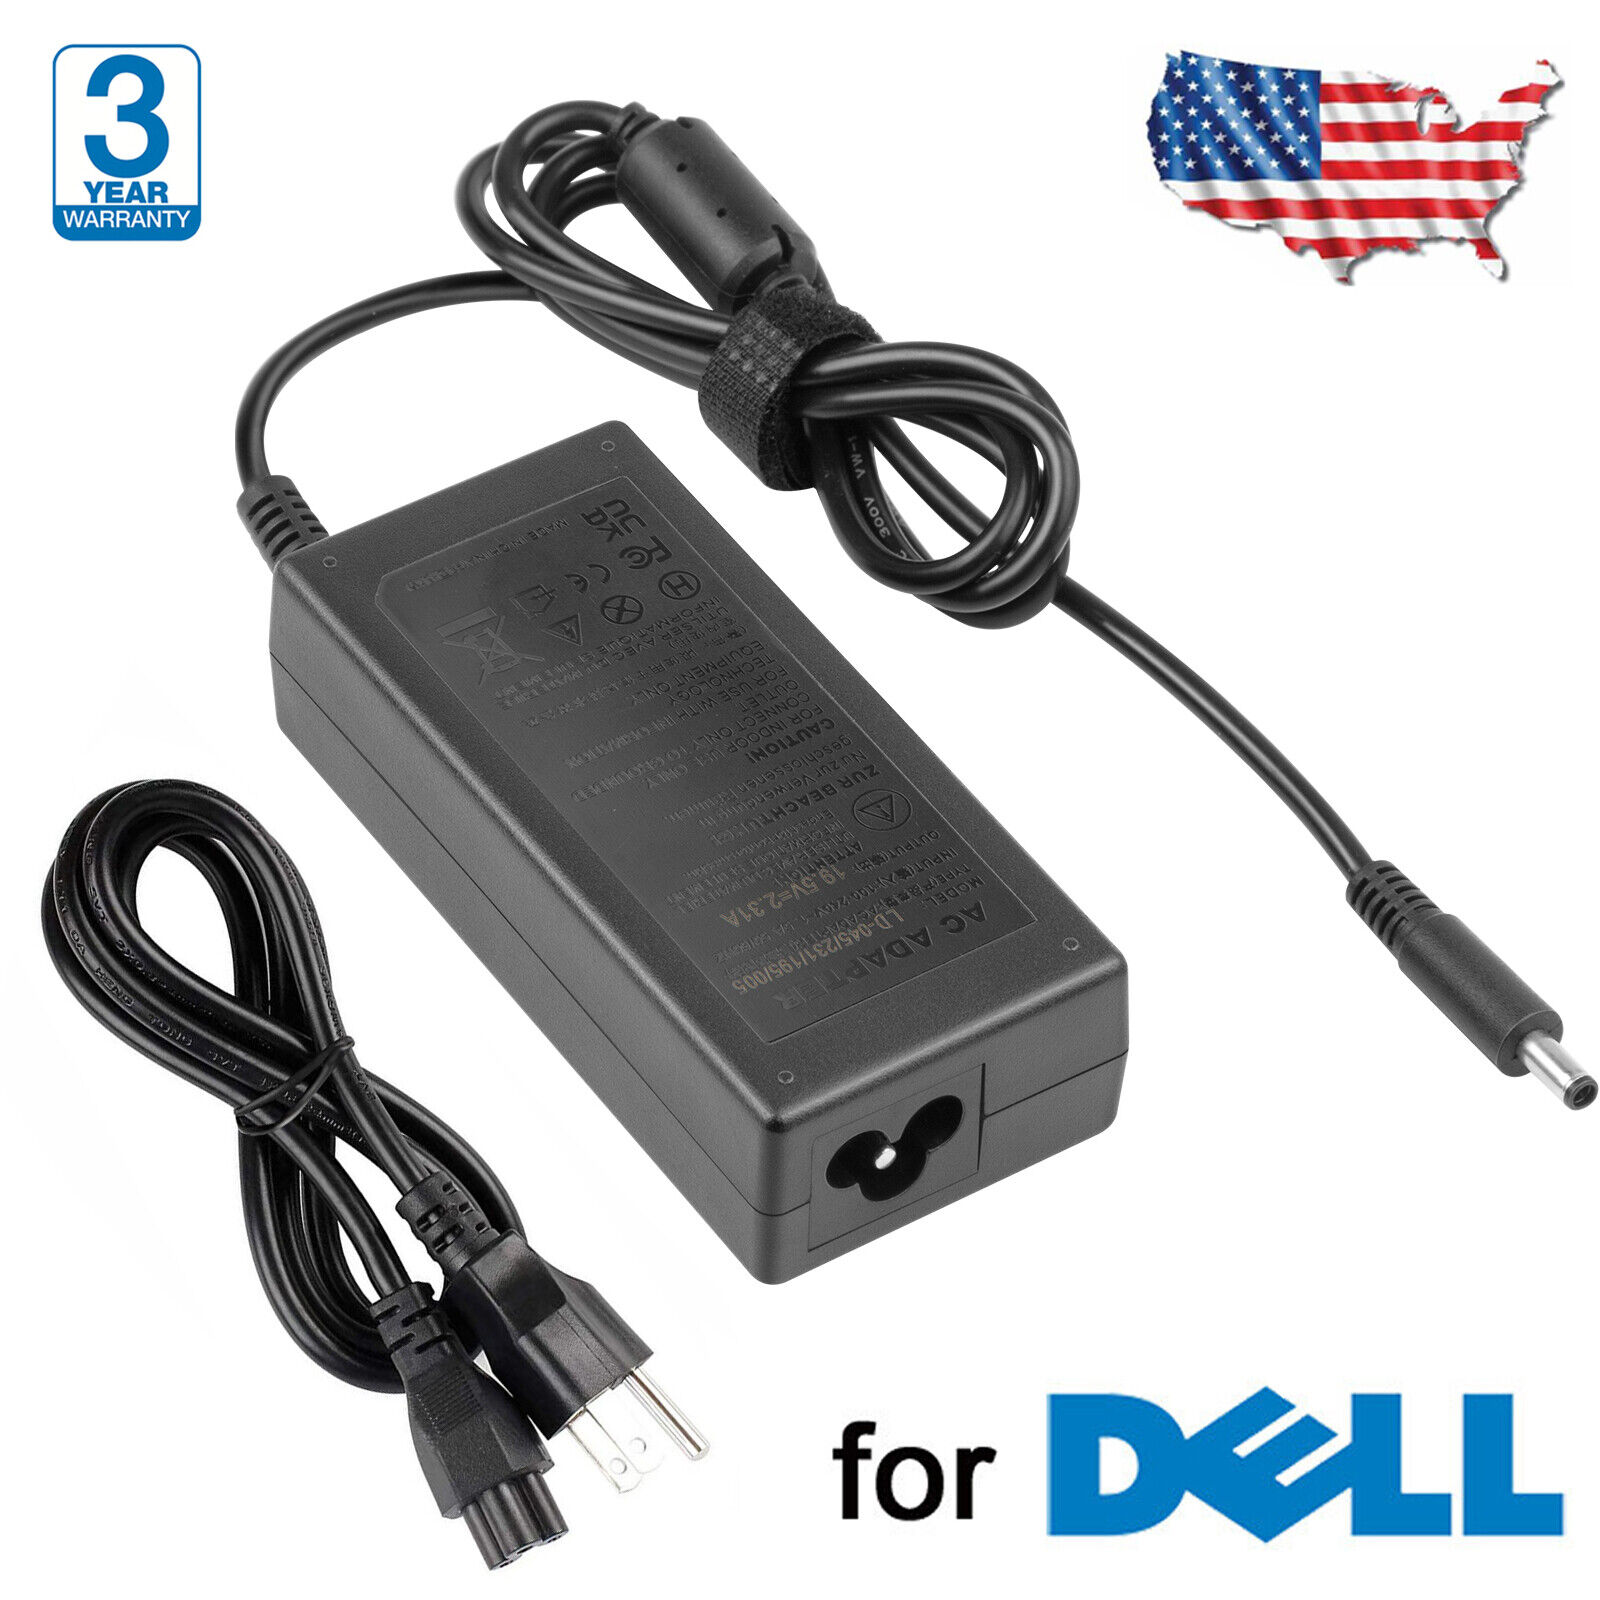 AC Adapter Power Supply for Dell Docking Station D3100 Displaylink 4k PSU R6WD9